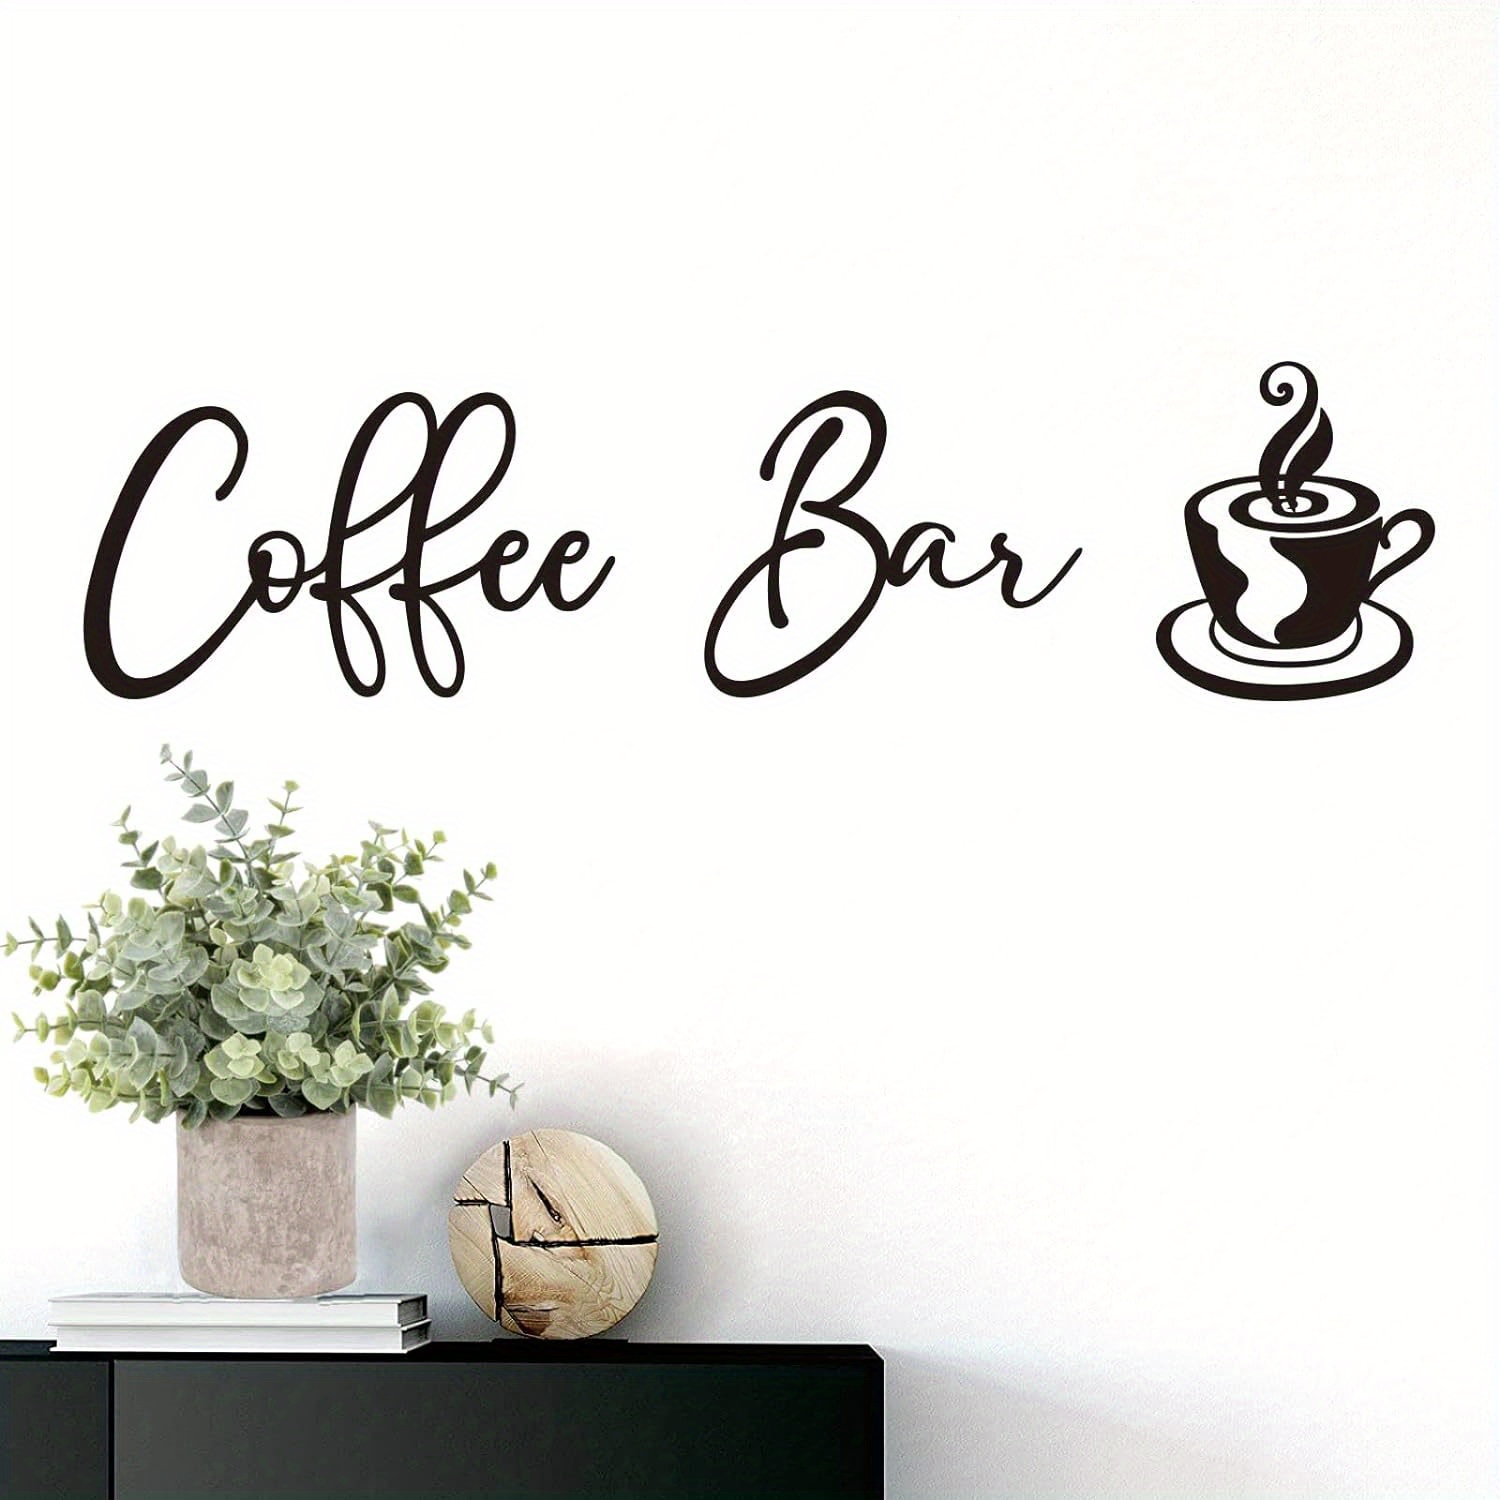 

Coffee Bar Sign Coffee Signs Accessories Metal Rustic Hanging Wall Decor Kitchen Coffee Decor Station Letter Word Art Farmhouse Decoration For Home, Cafe, Tabletop, Restaurants Coffee Lover Gifts